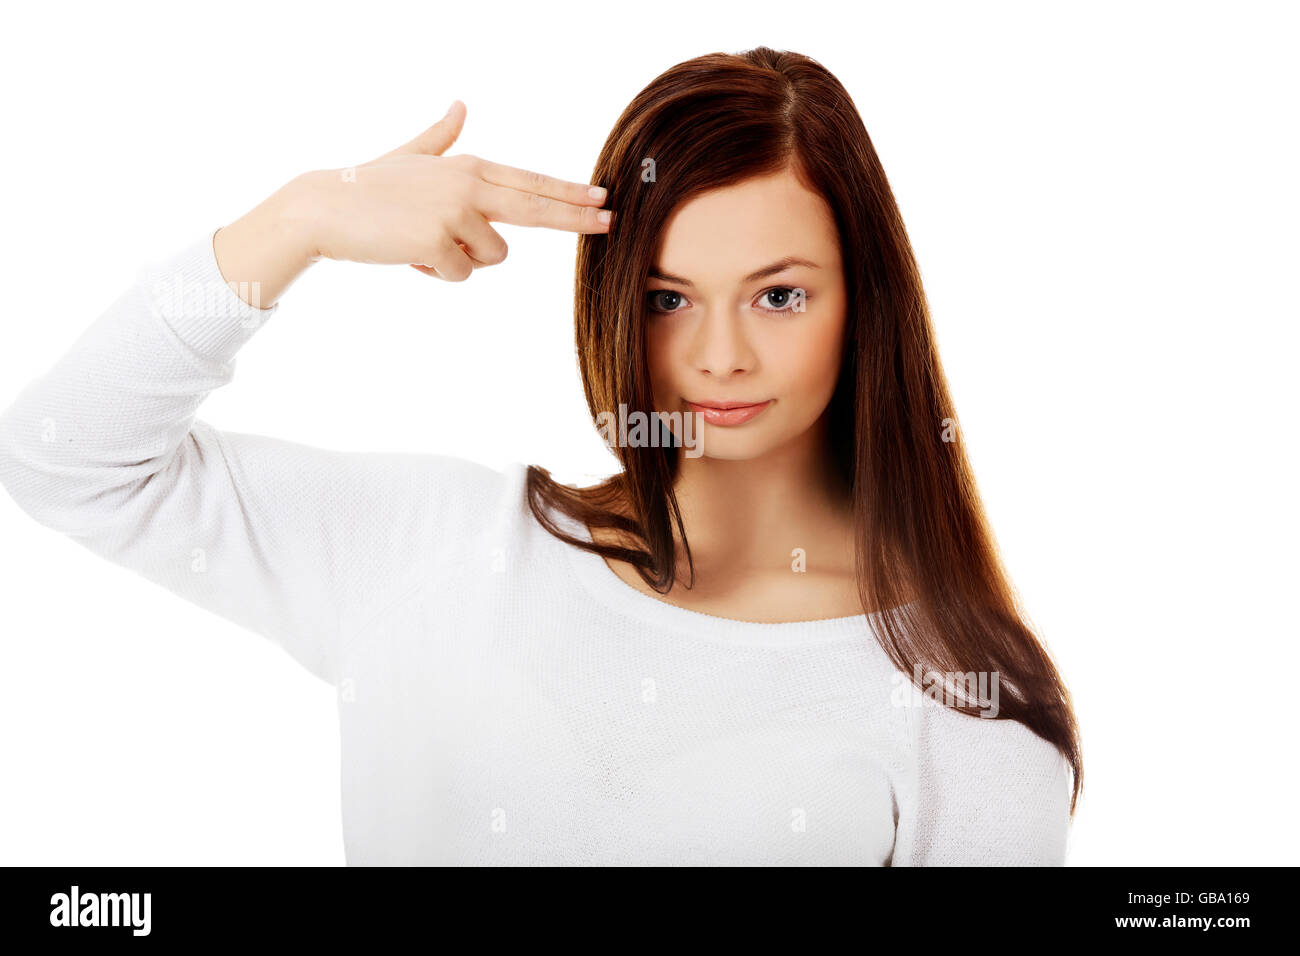 Young woman shoots herself in the head with finger gun gesture Stock Photo